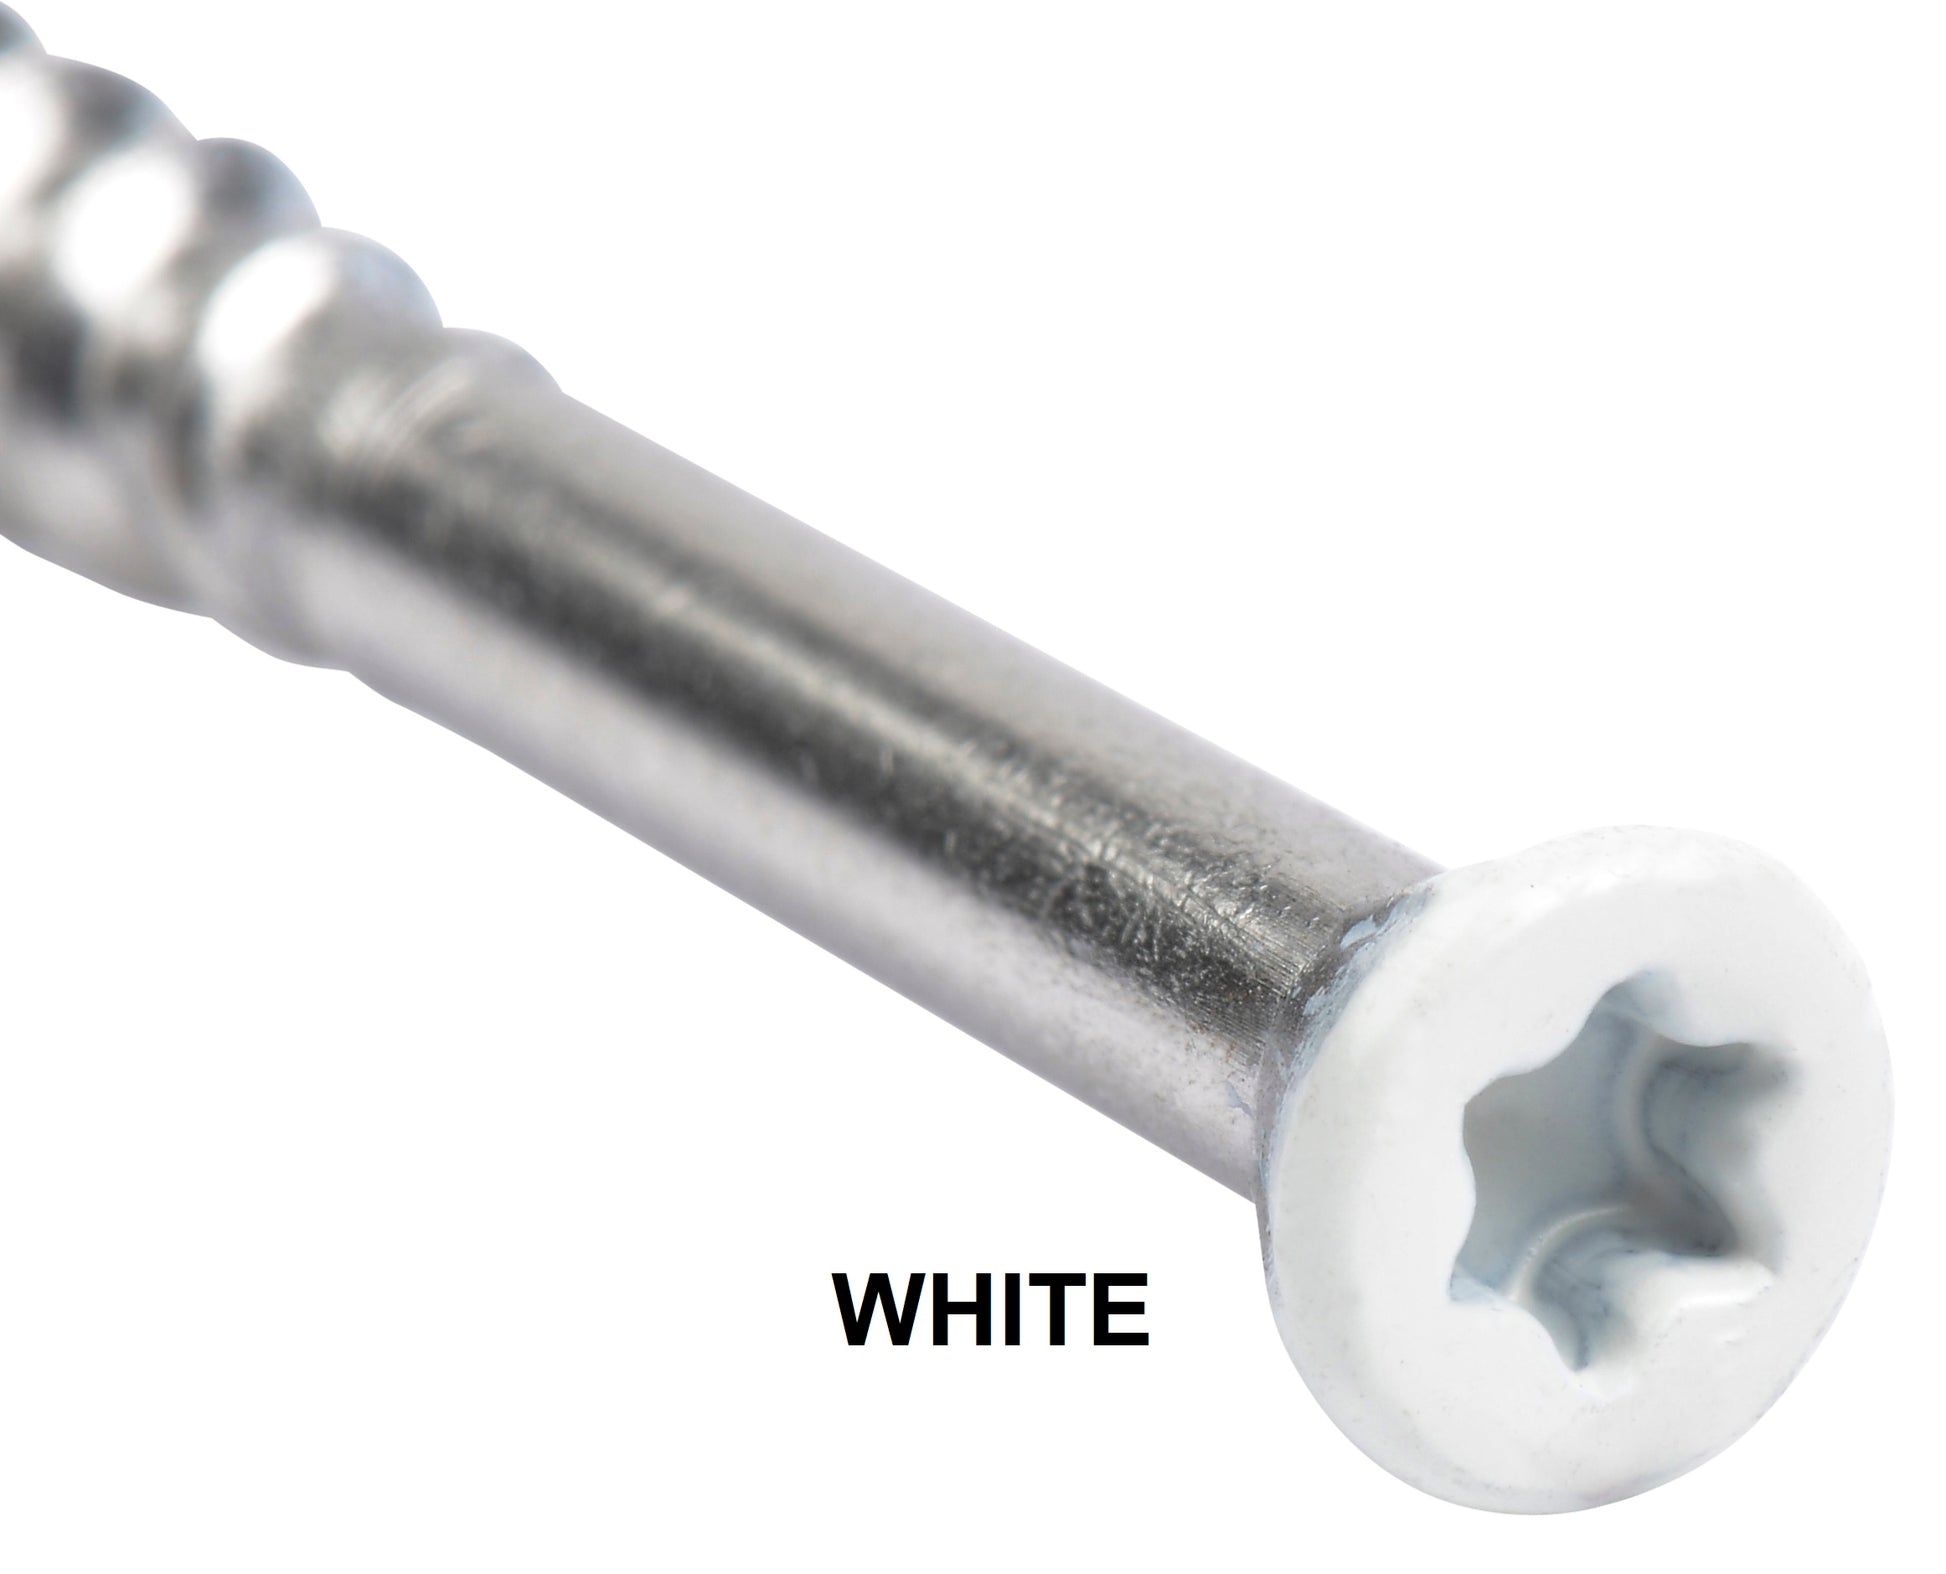 White Color 7 x 2-1/4 COLOR TRIM FINISH HEAD STAINLESS-TORX DECK SCREWS Torx (Star) Drive 305 Stainless Steel Trim Head with Nibs to Countersink Type-17 Cutting Point